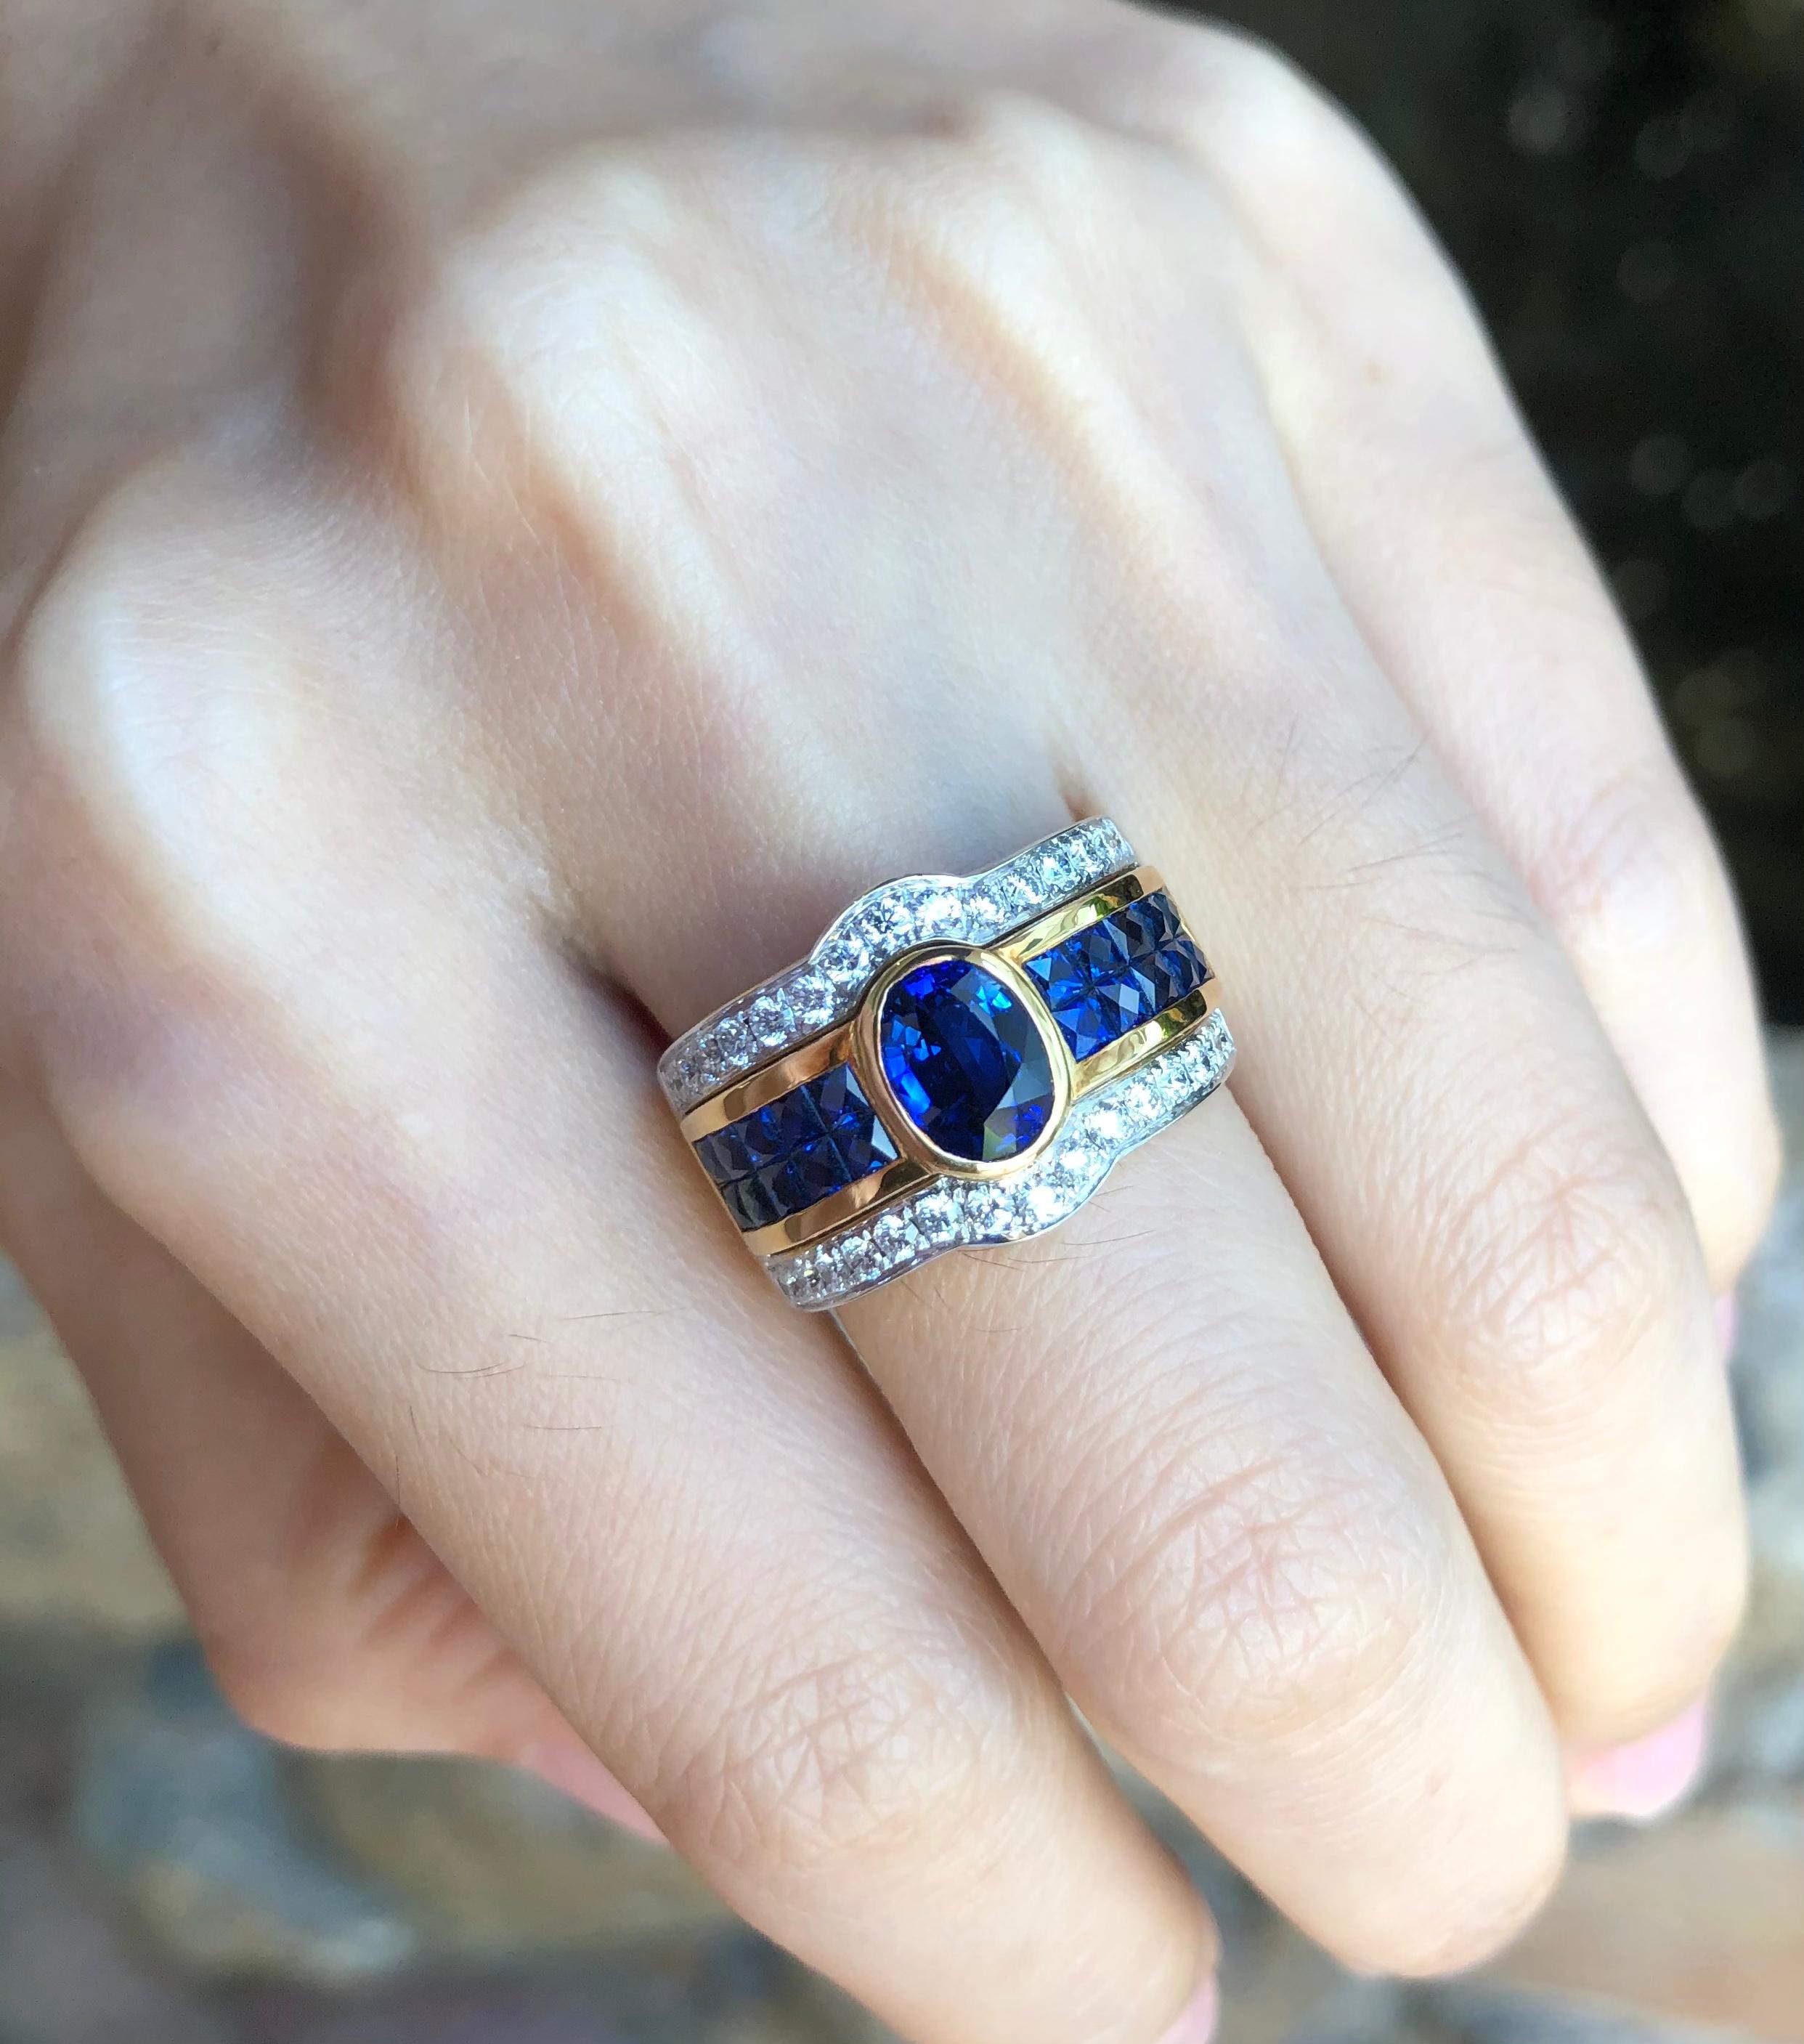 Blue Sapphire 1.36 carats with Diamond 0.58 carat and Blue Sapphire 1.98 carats Ring set in 18 Karat Gold Settings

Width:  2.0 cm 
Length:  1.3 cm
Ring Size: 52
Total Weight: 12.42 grams

